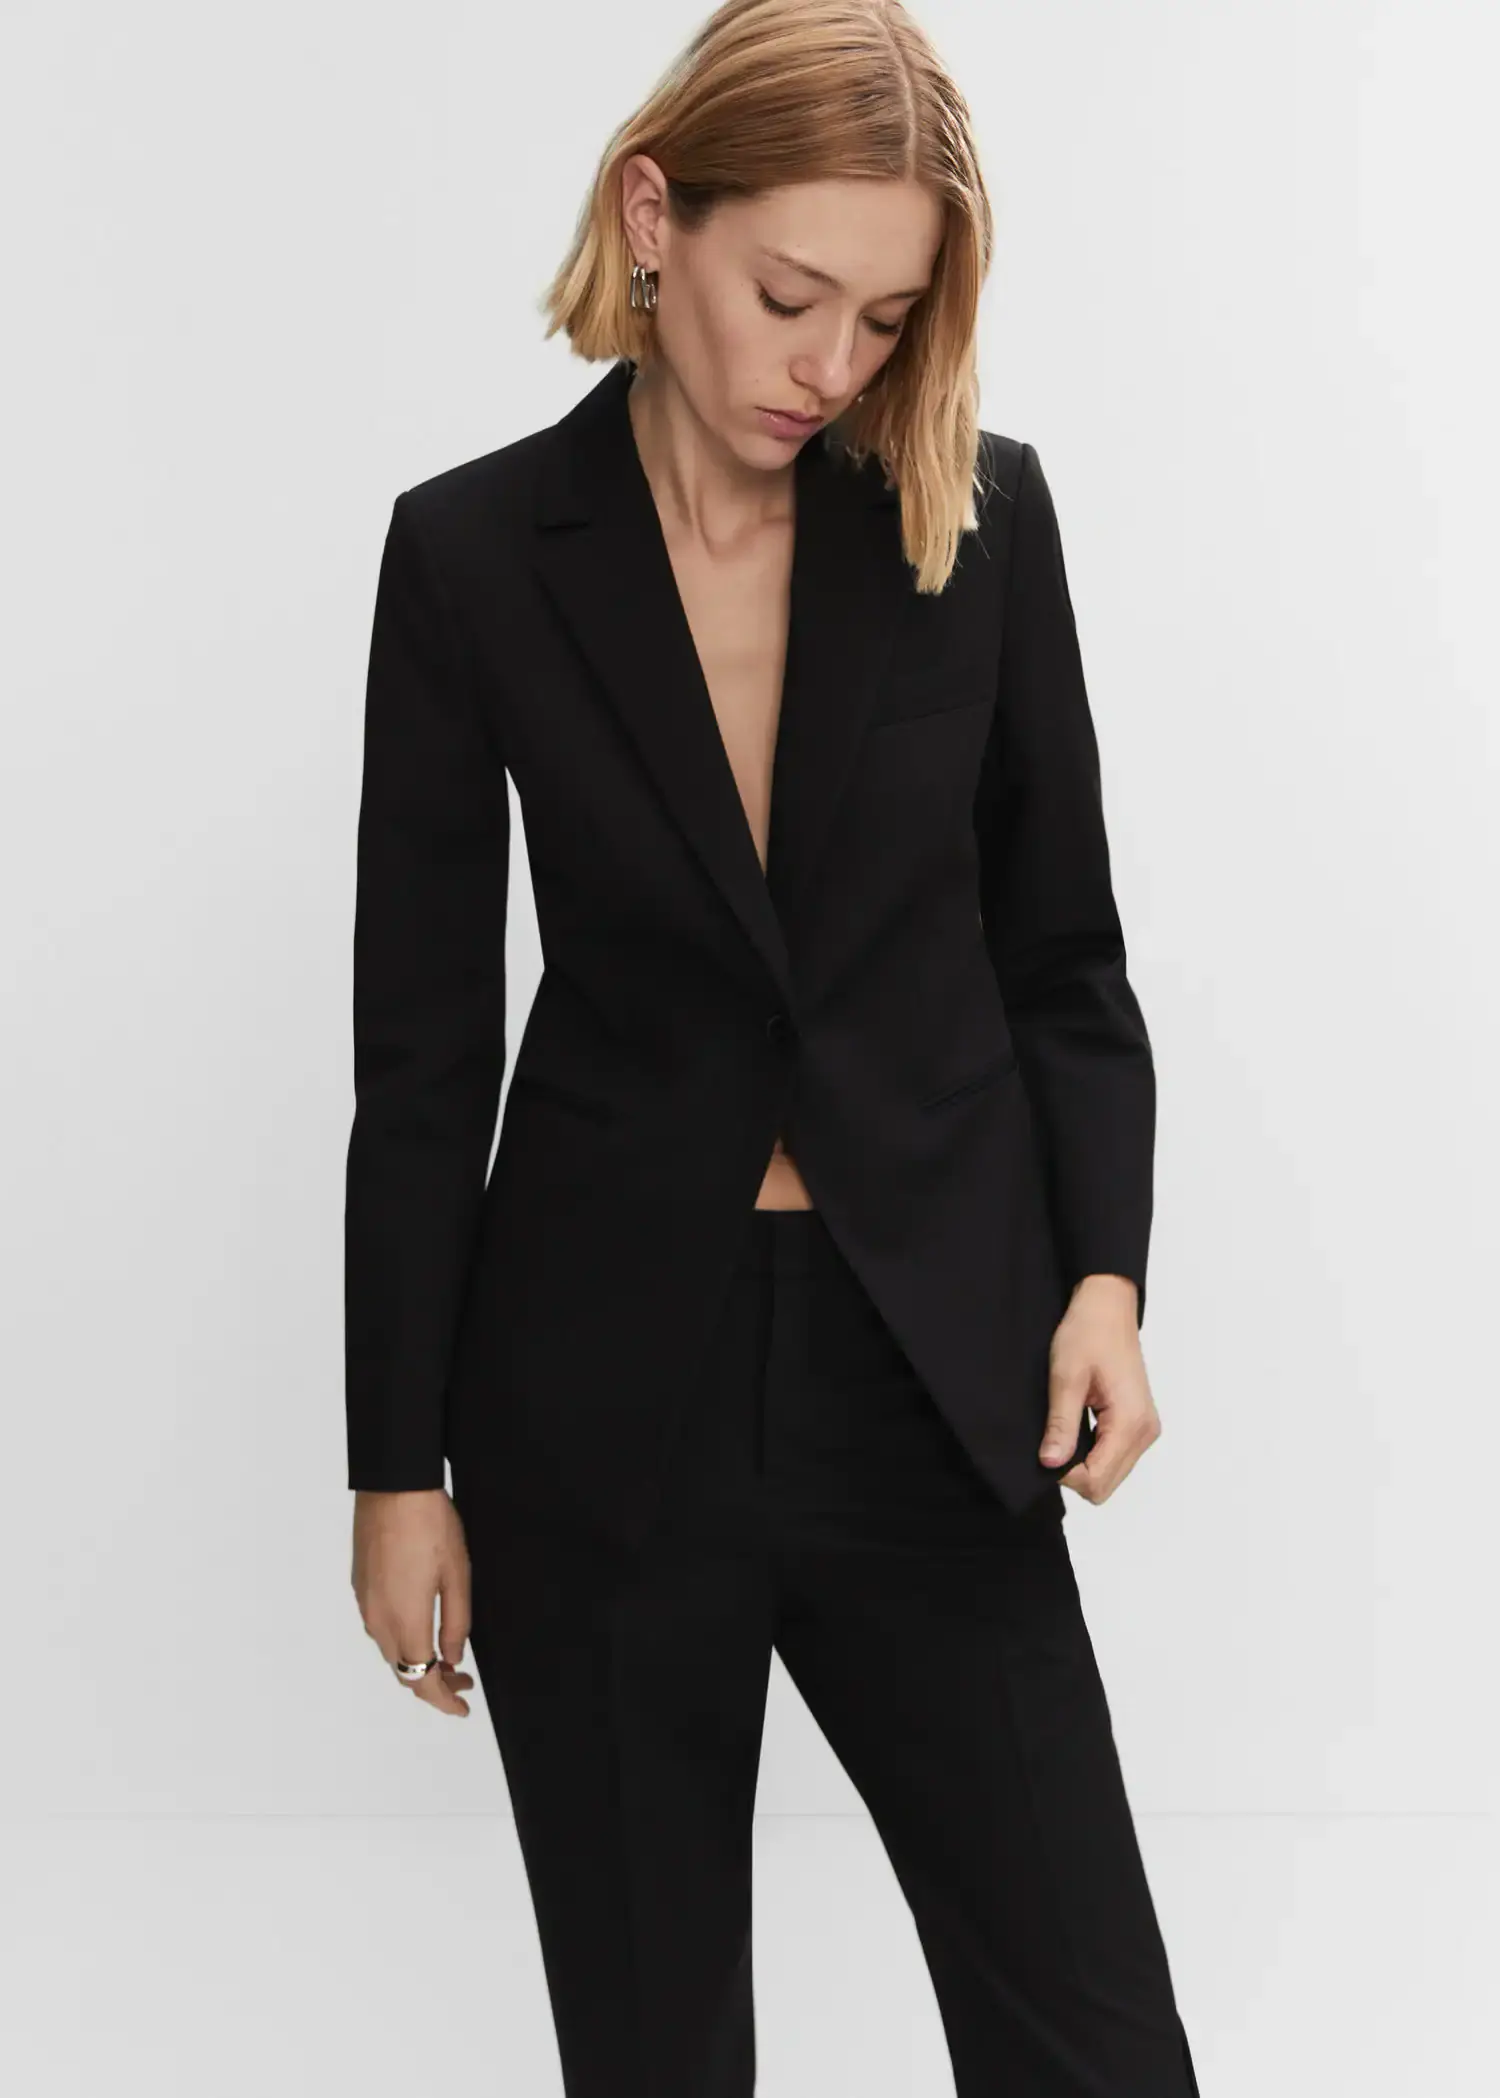 Mango Fitted suit blazer. a woman in a black suit is posing for a picture 